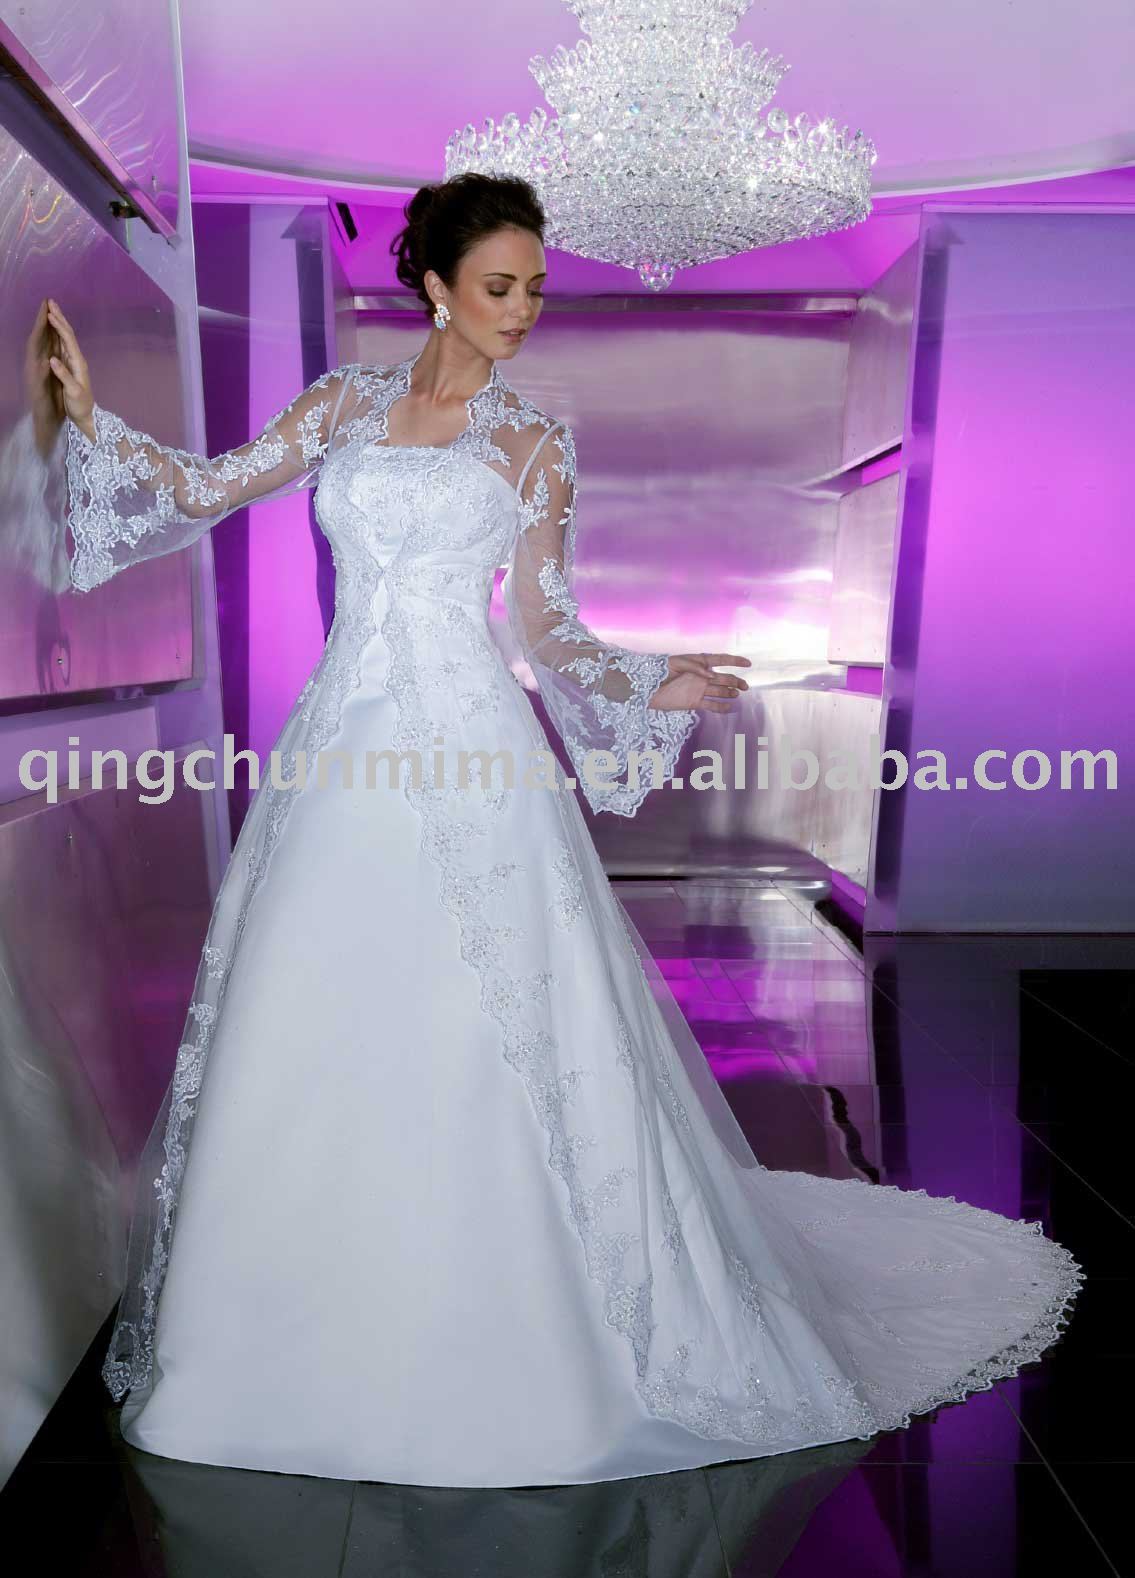 silver and white wedding dress long sleeves